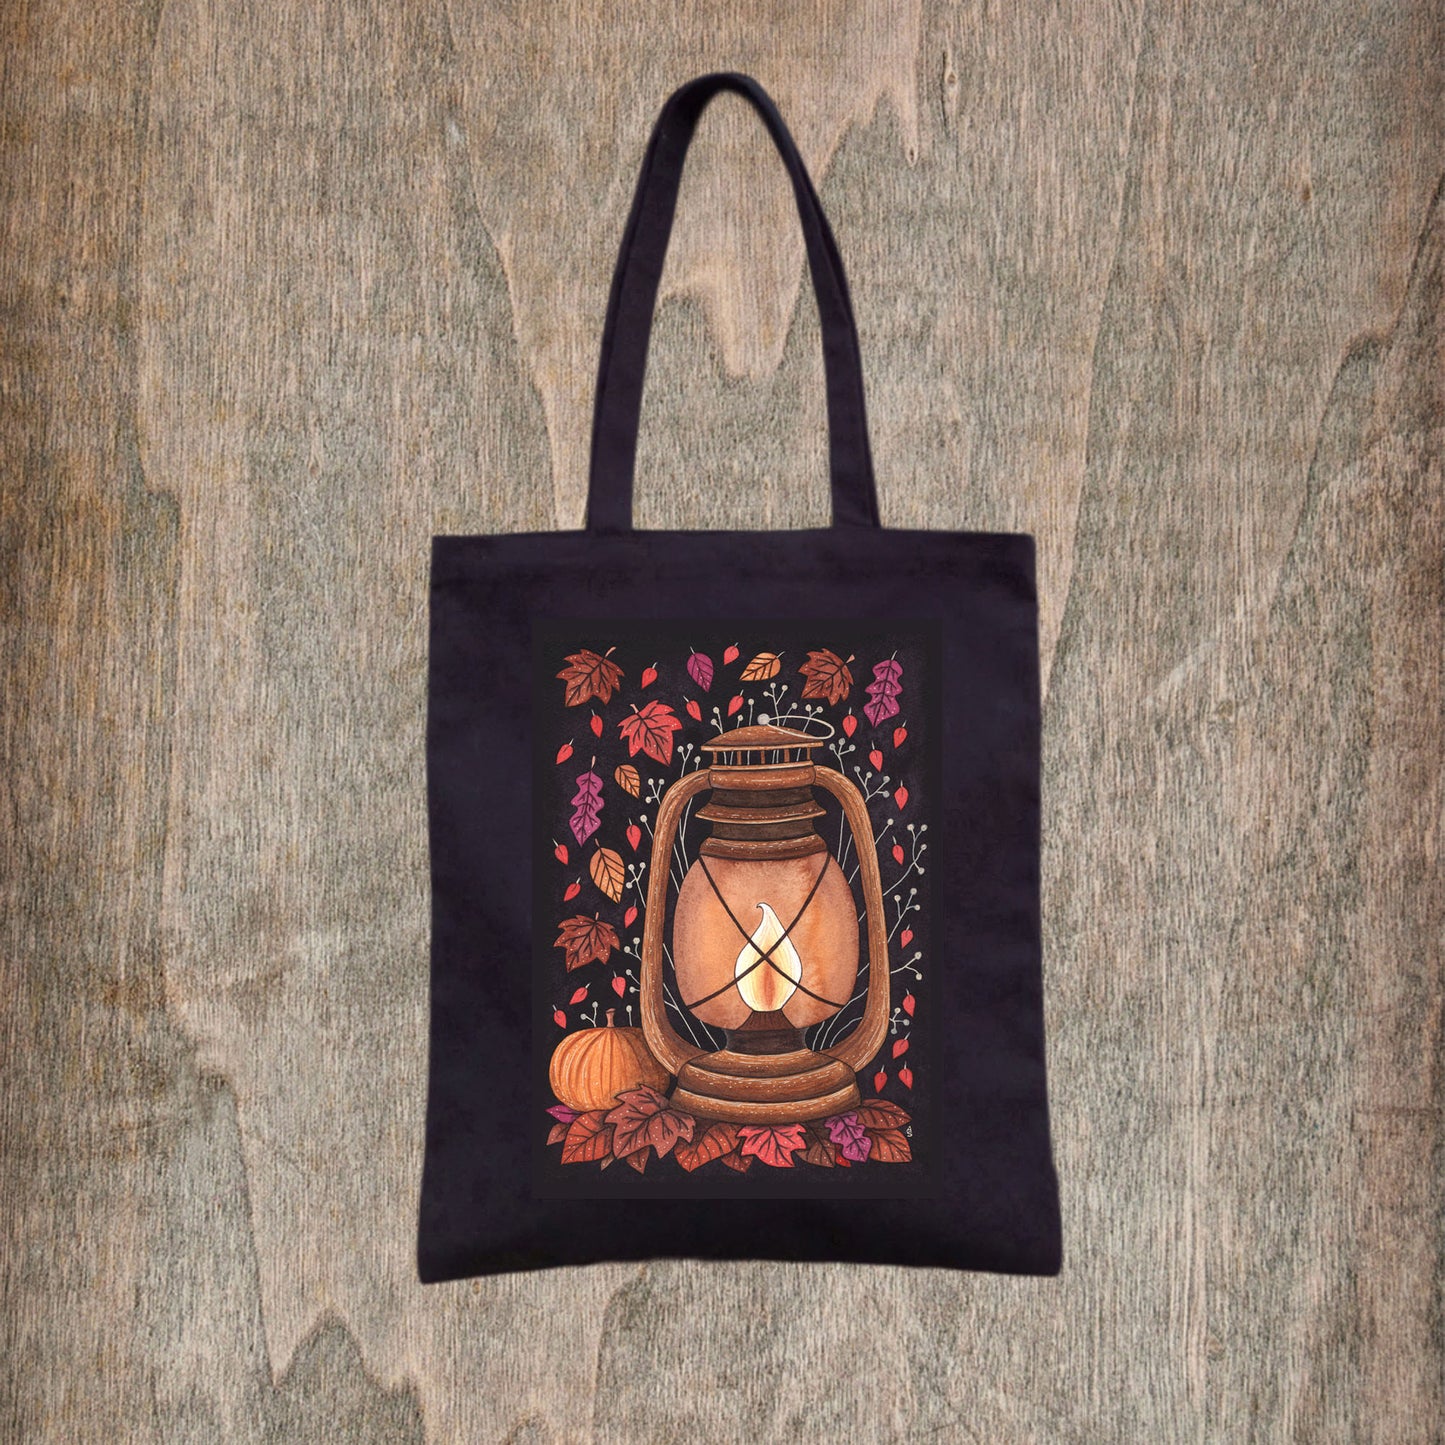 Winter's Flame Black Tote Bag - Cosy Autumn Winter Lantern Bag - Autumn Leaves Purple Red Grocery Shopping Bag